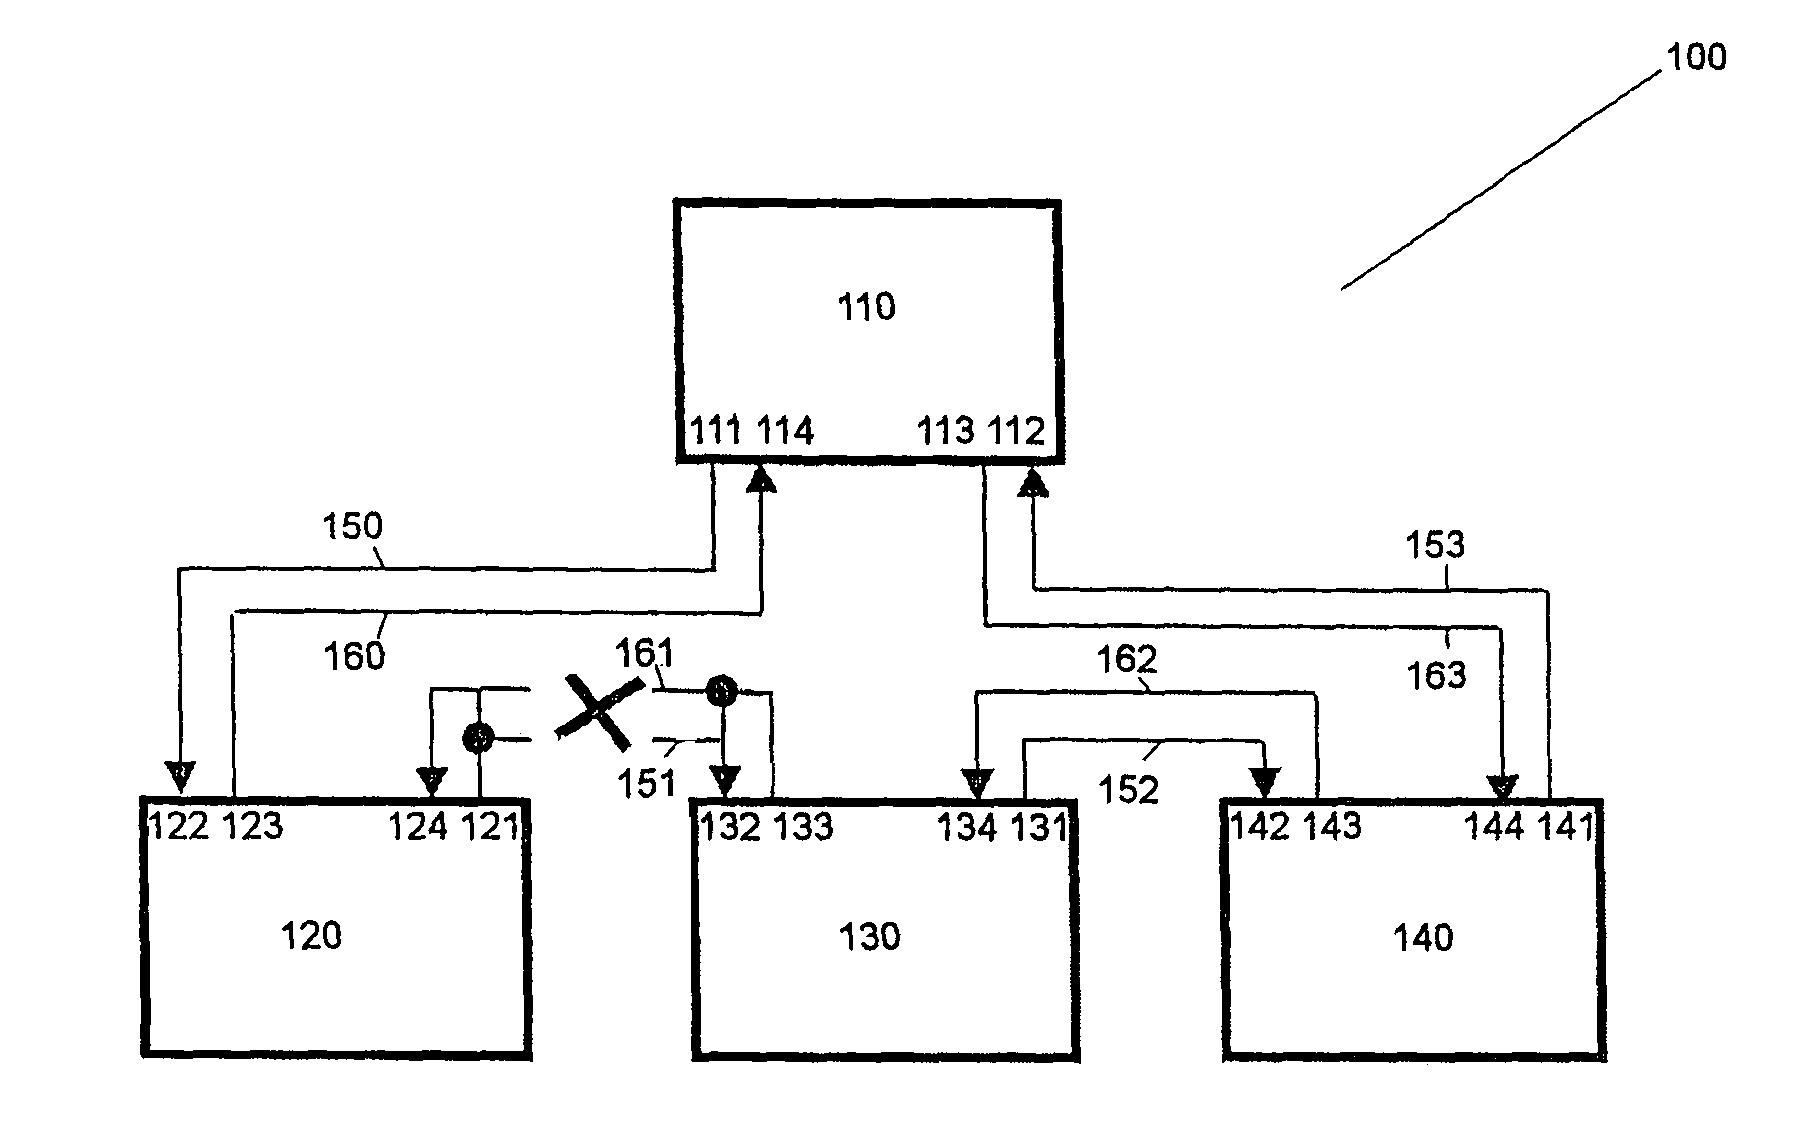 Method for operating a network having a ring topology